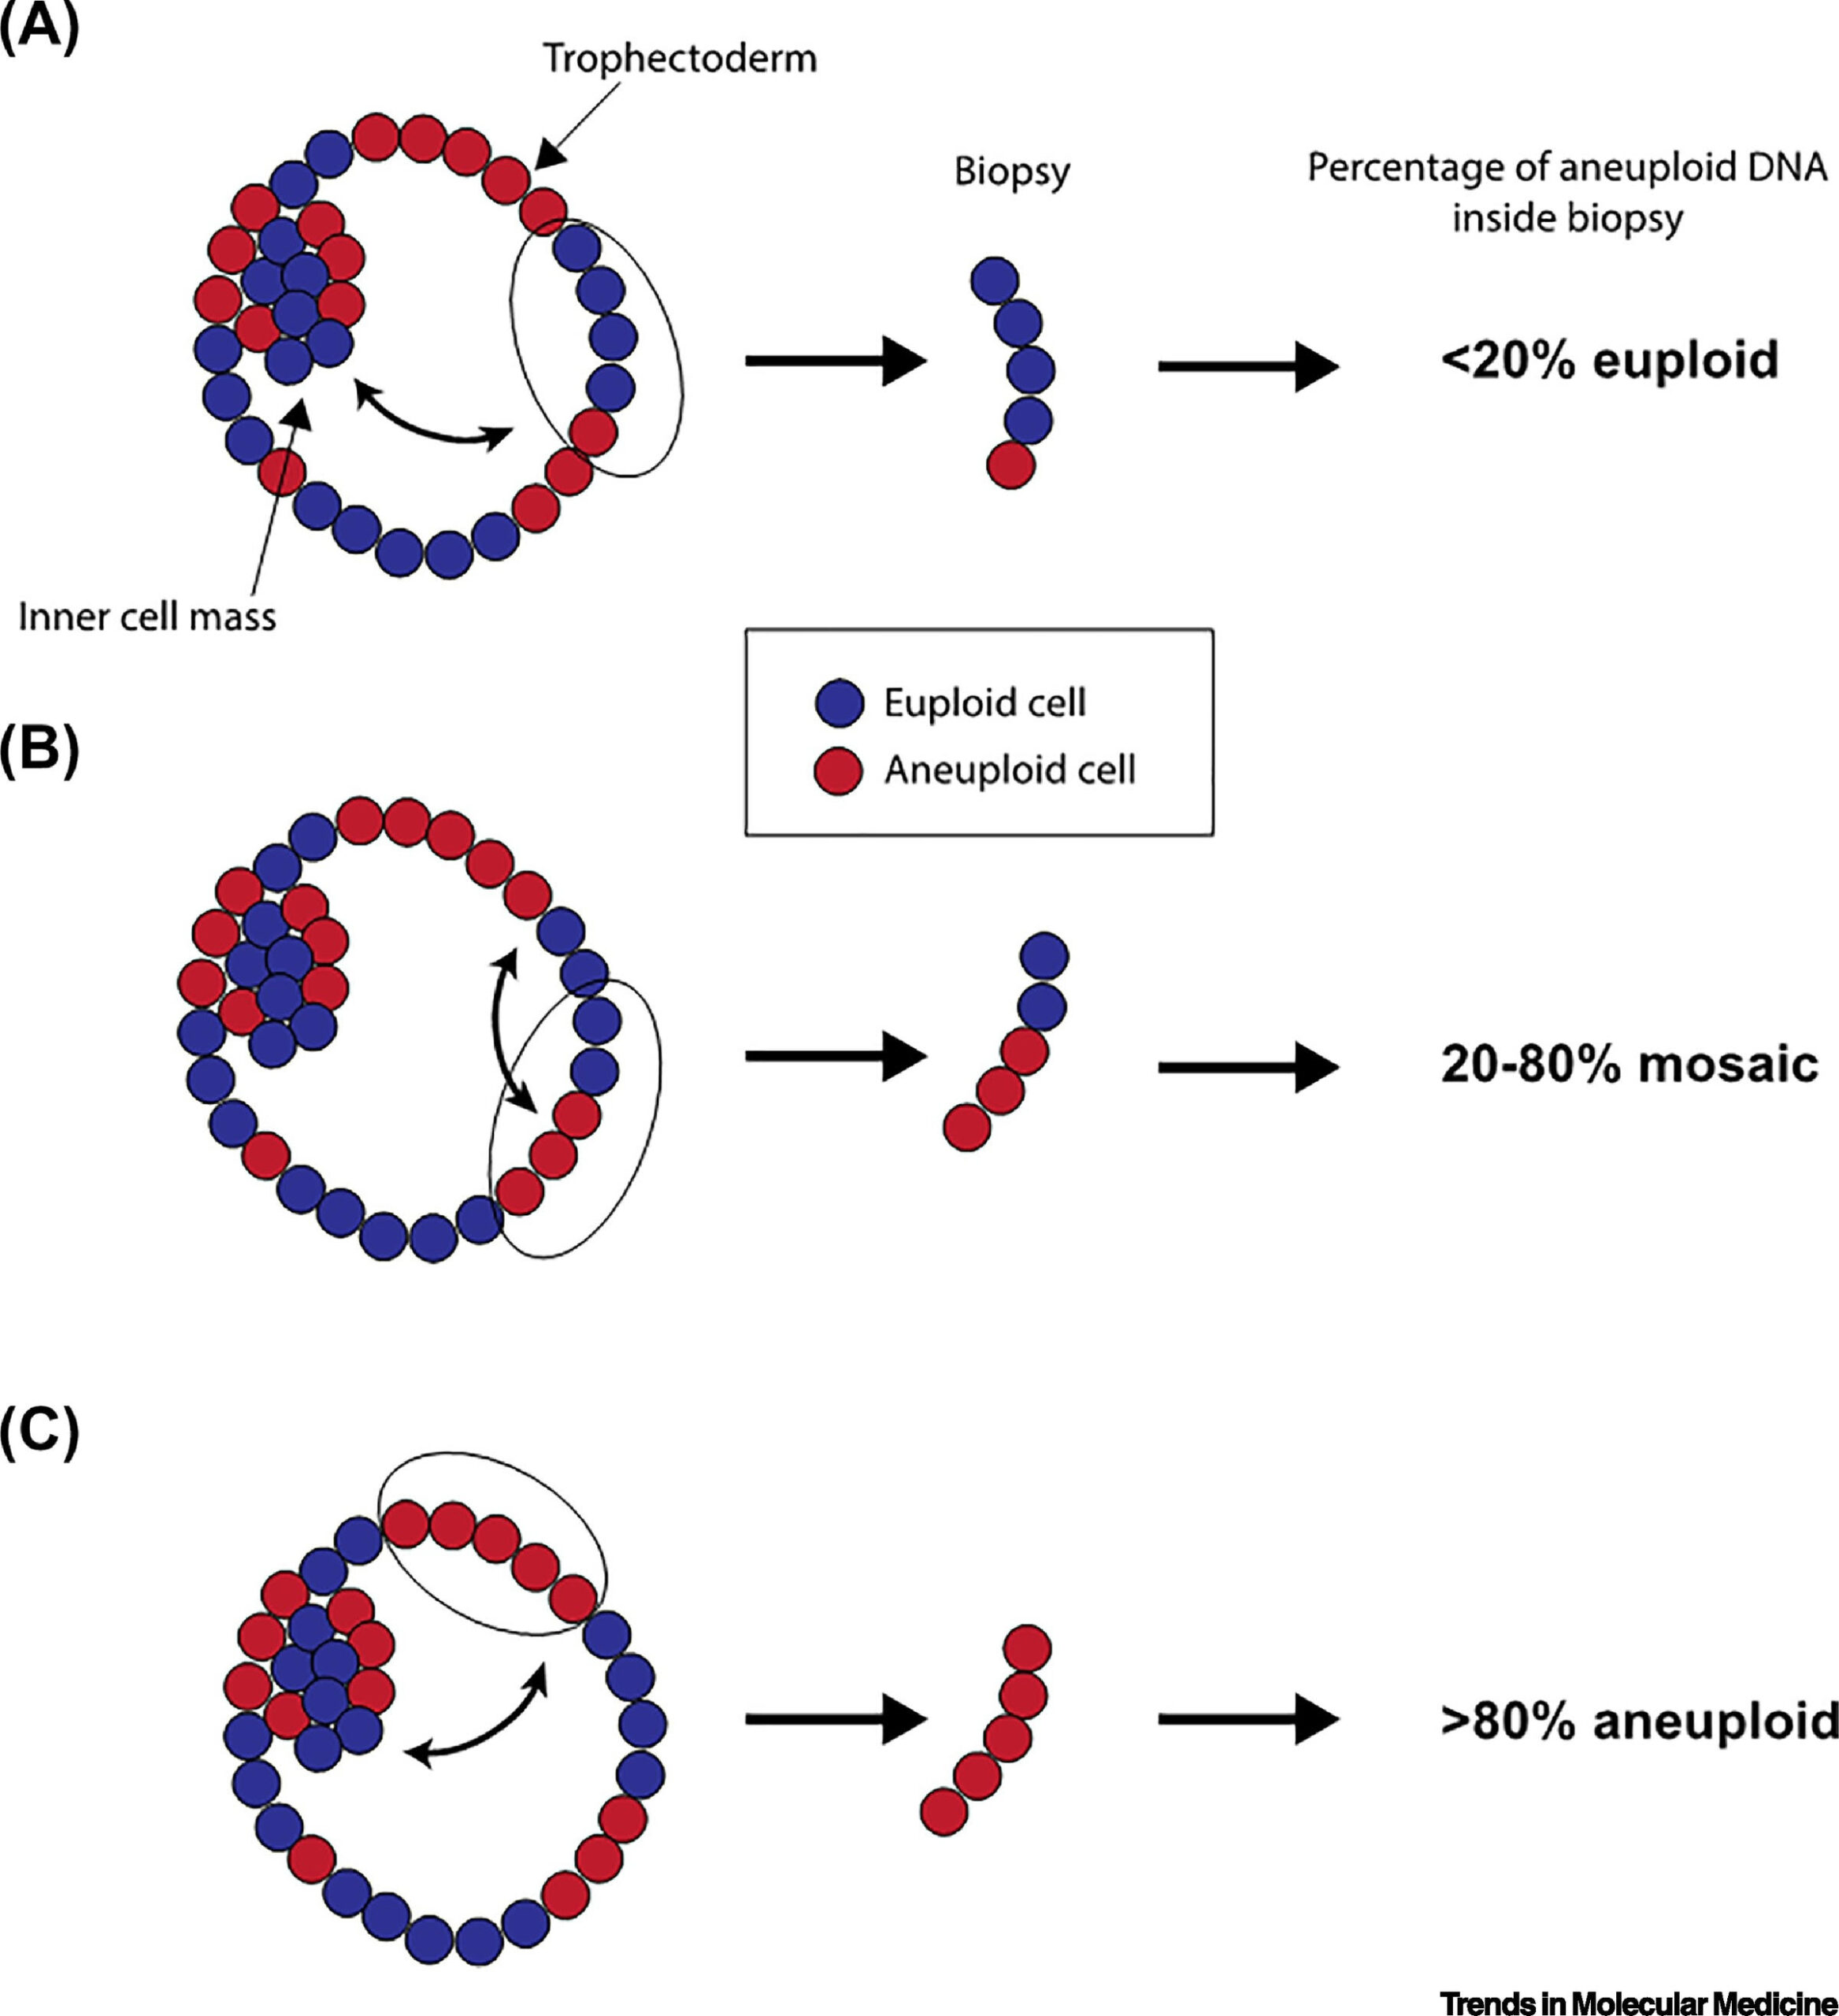 Medical Image of Chromosomes and Embryos showing an illustration of chromosomes and embryos with different numbers of chromosomes to represent the concept of aneuploidies and mosaicism.